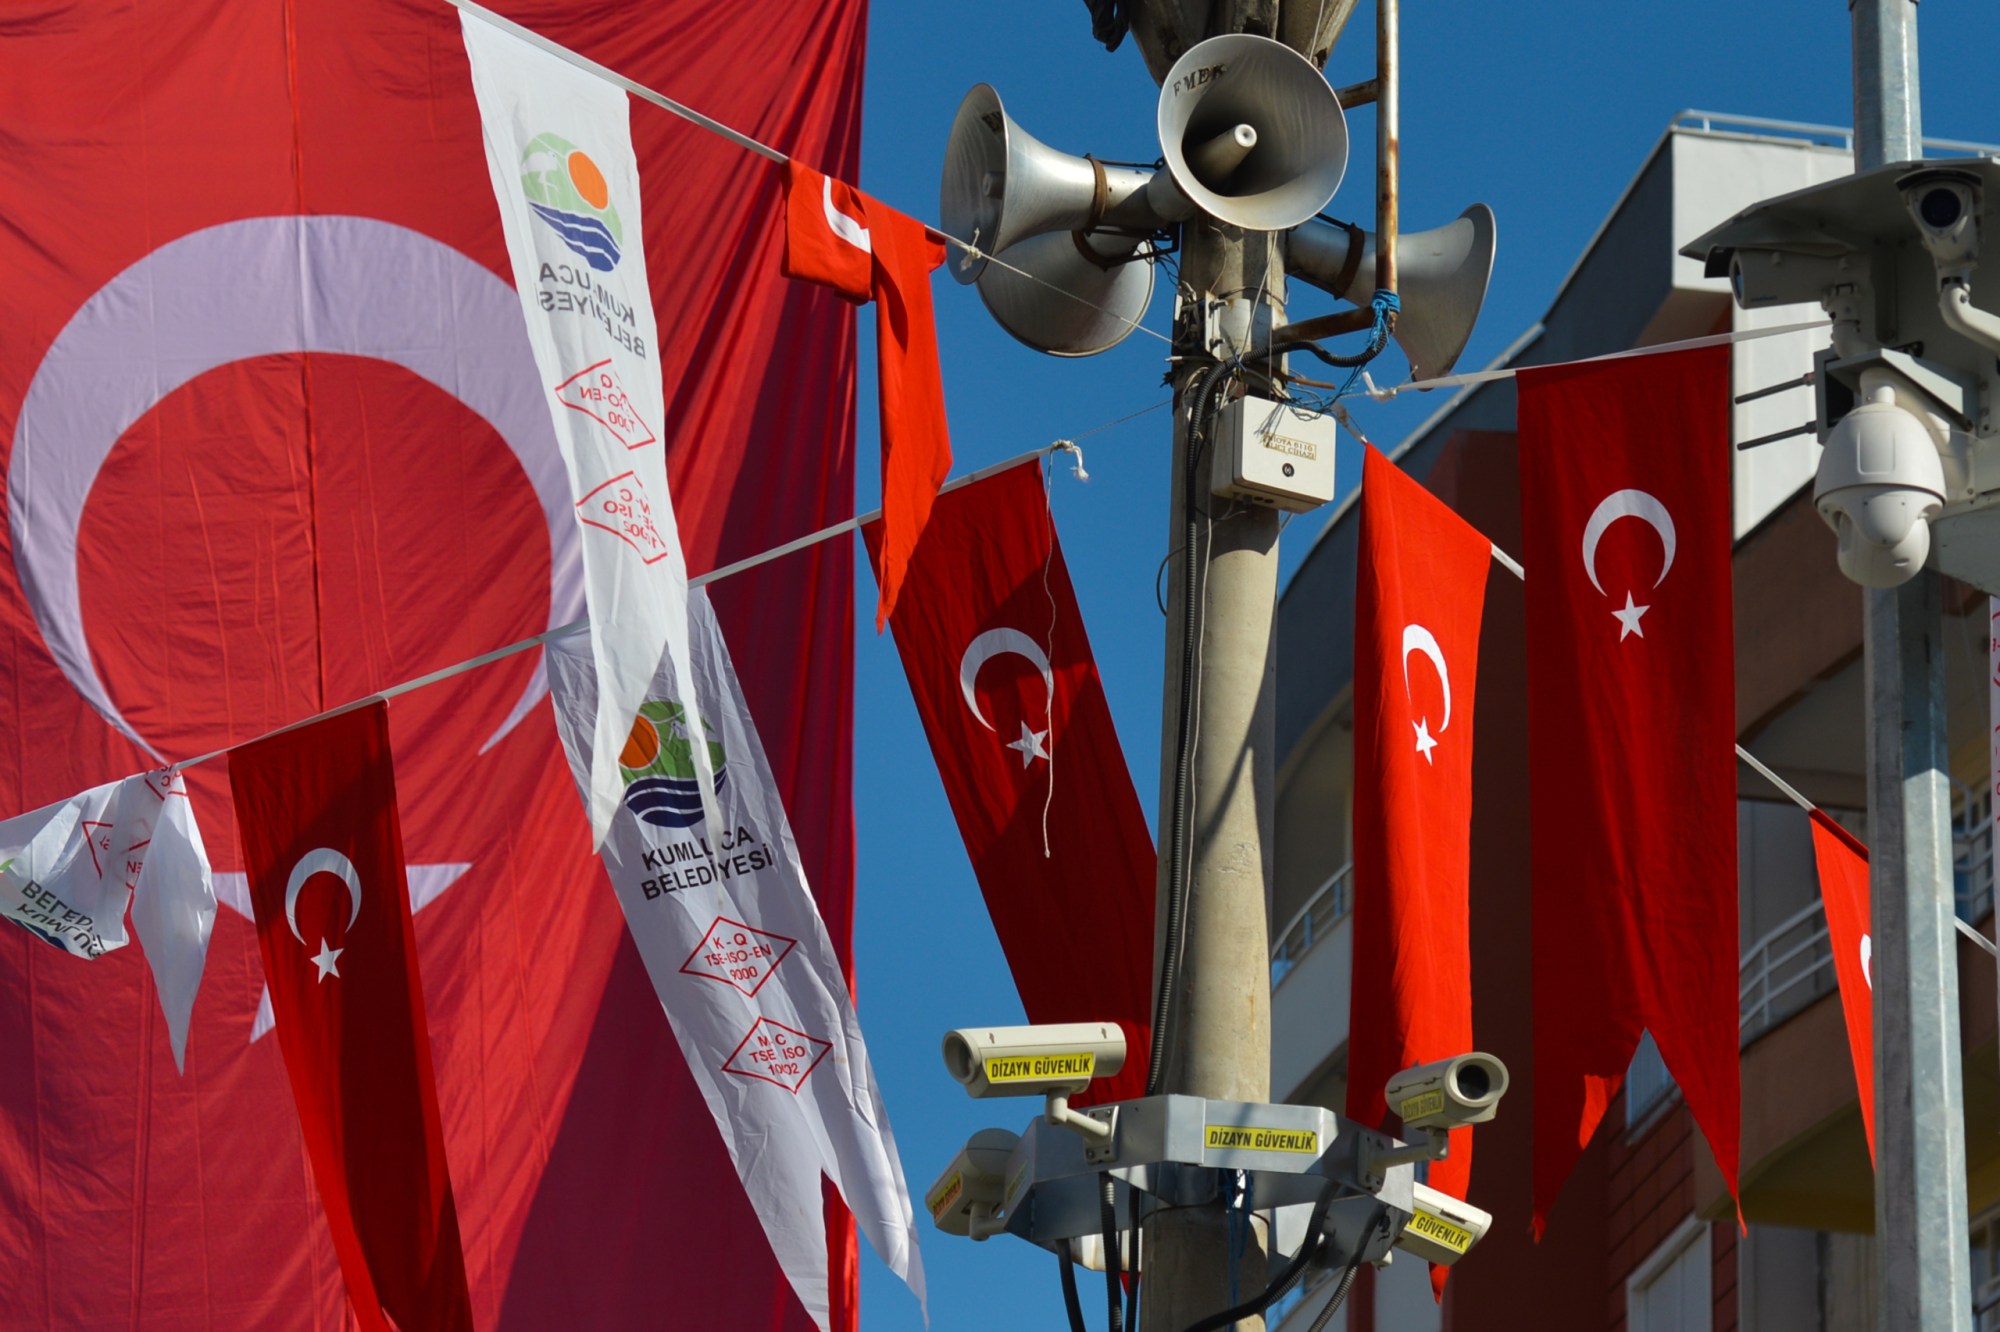 Turkish National flags and CCTV cameras and spikers seen in the main roundabout of Kumluca.
On Wednesday, 11 October 2017, in Kumluka, Turkey. (Photo by Artur Widak/NurPhoto via Getty Images)